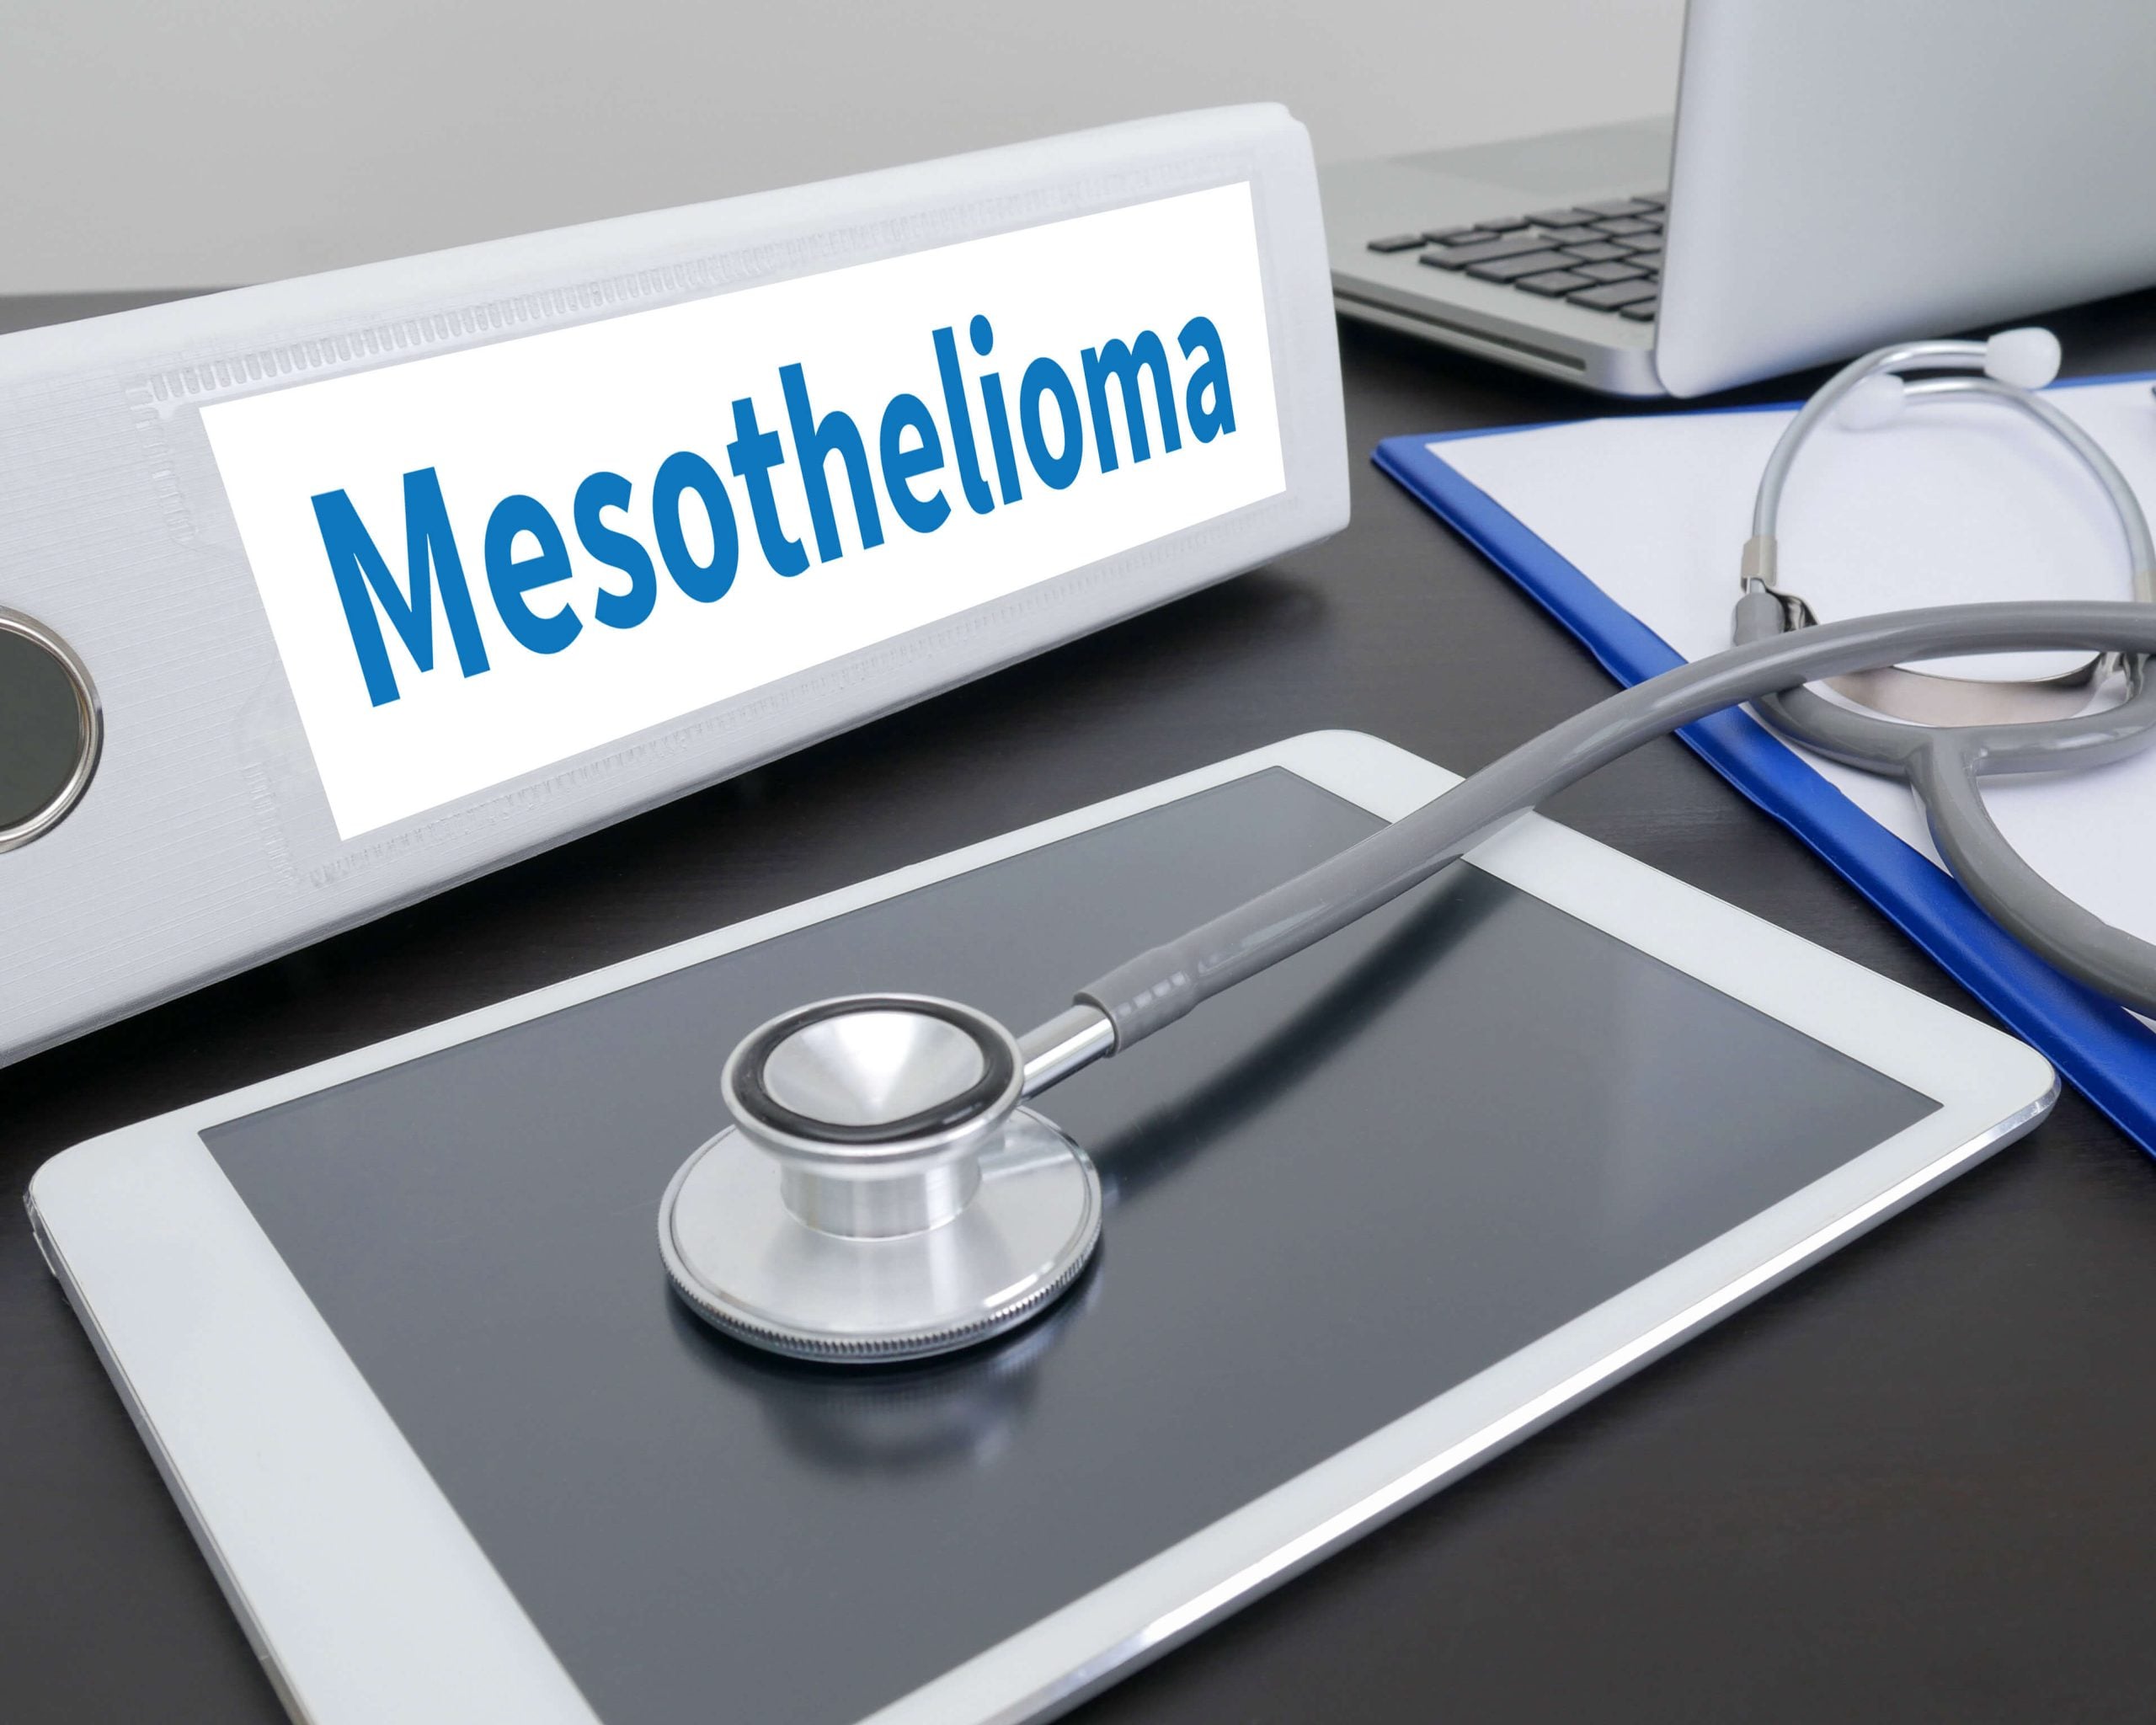 Stages-of-Mesothelioma in Seattle